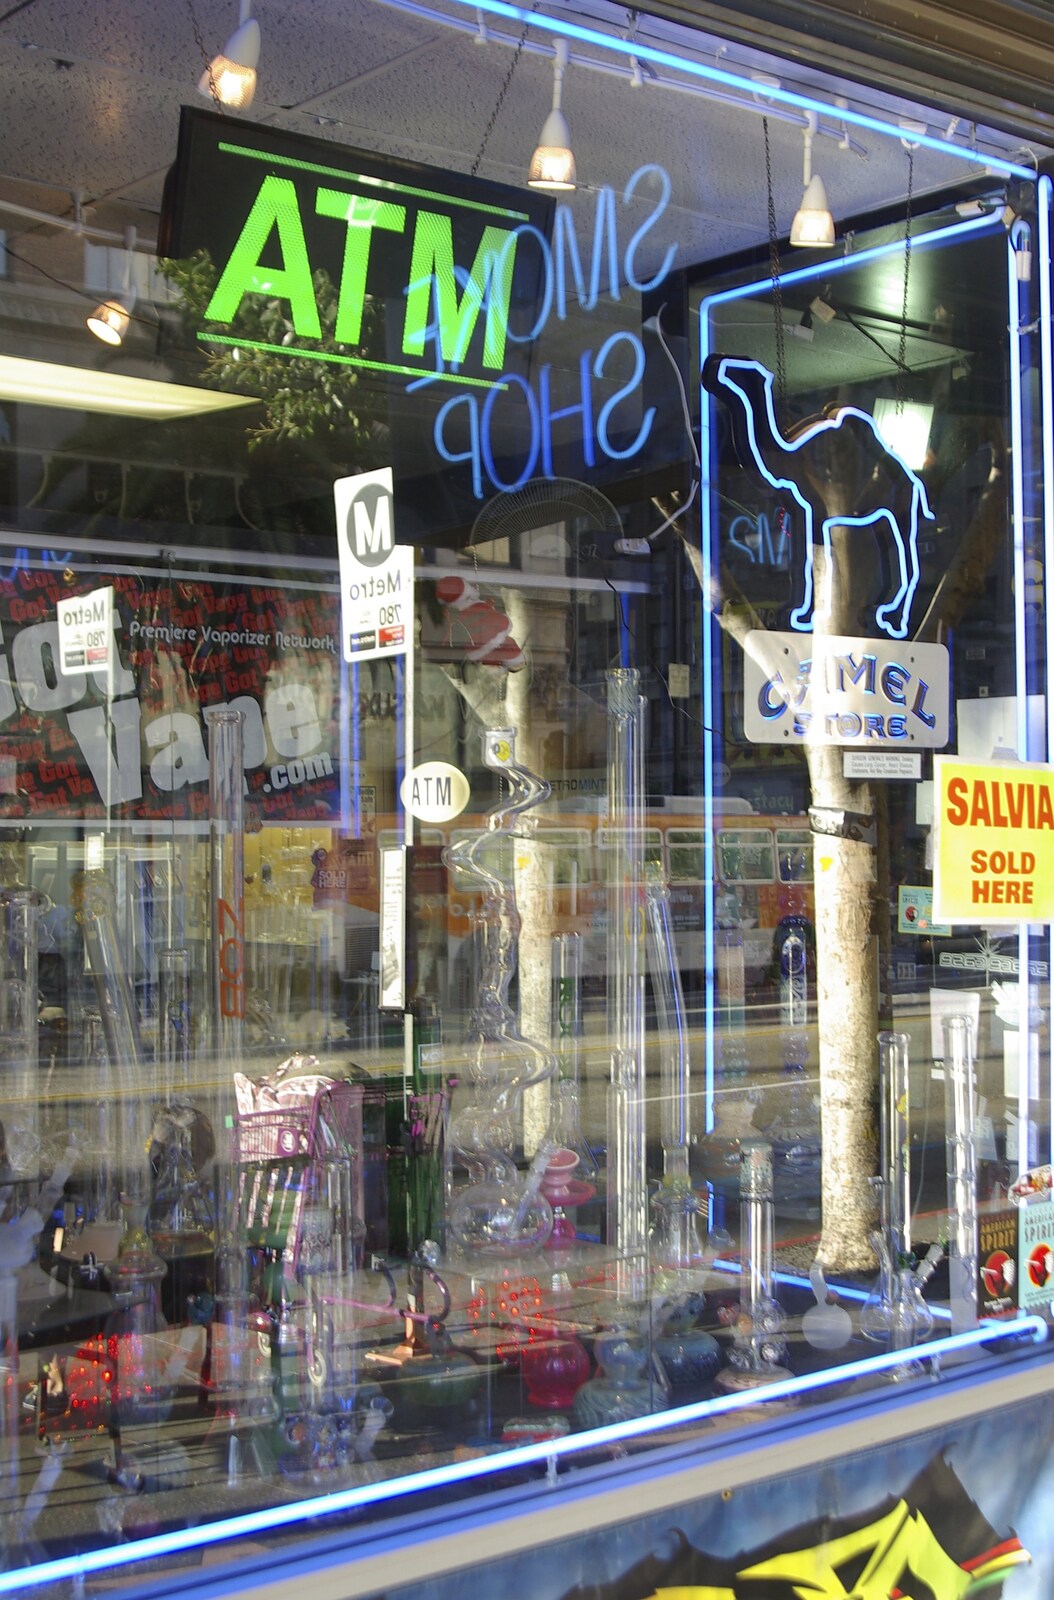 San Diego and Hollywood, California, US - 3rd March 2008: A groovy assortment of neon and glass bongs